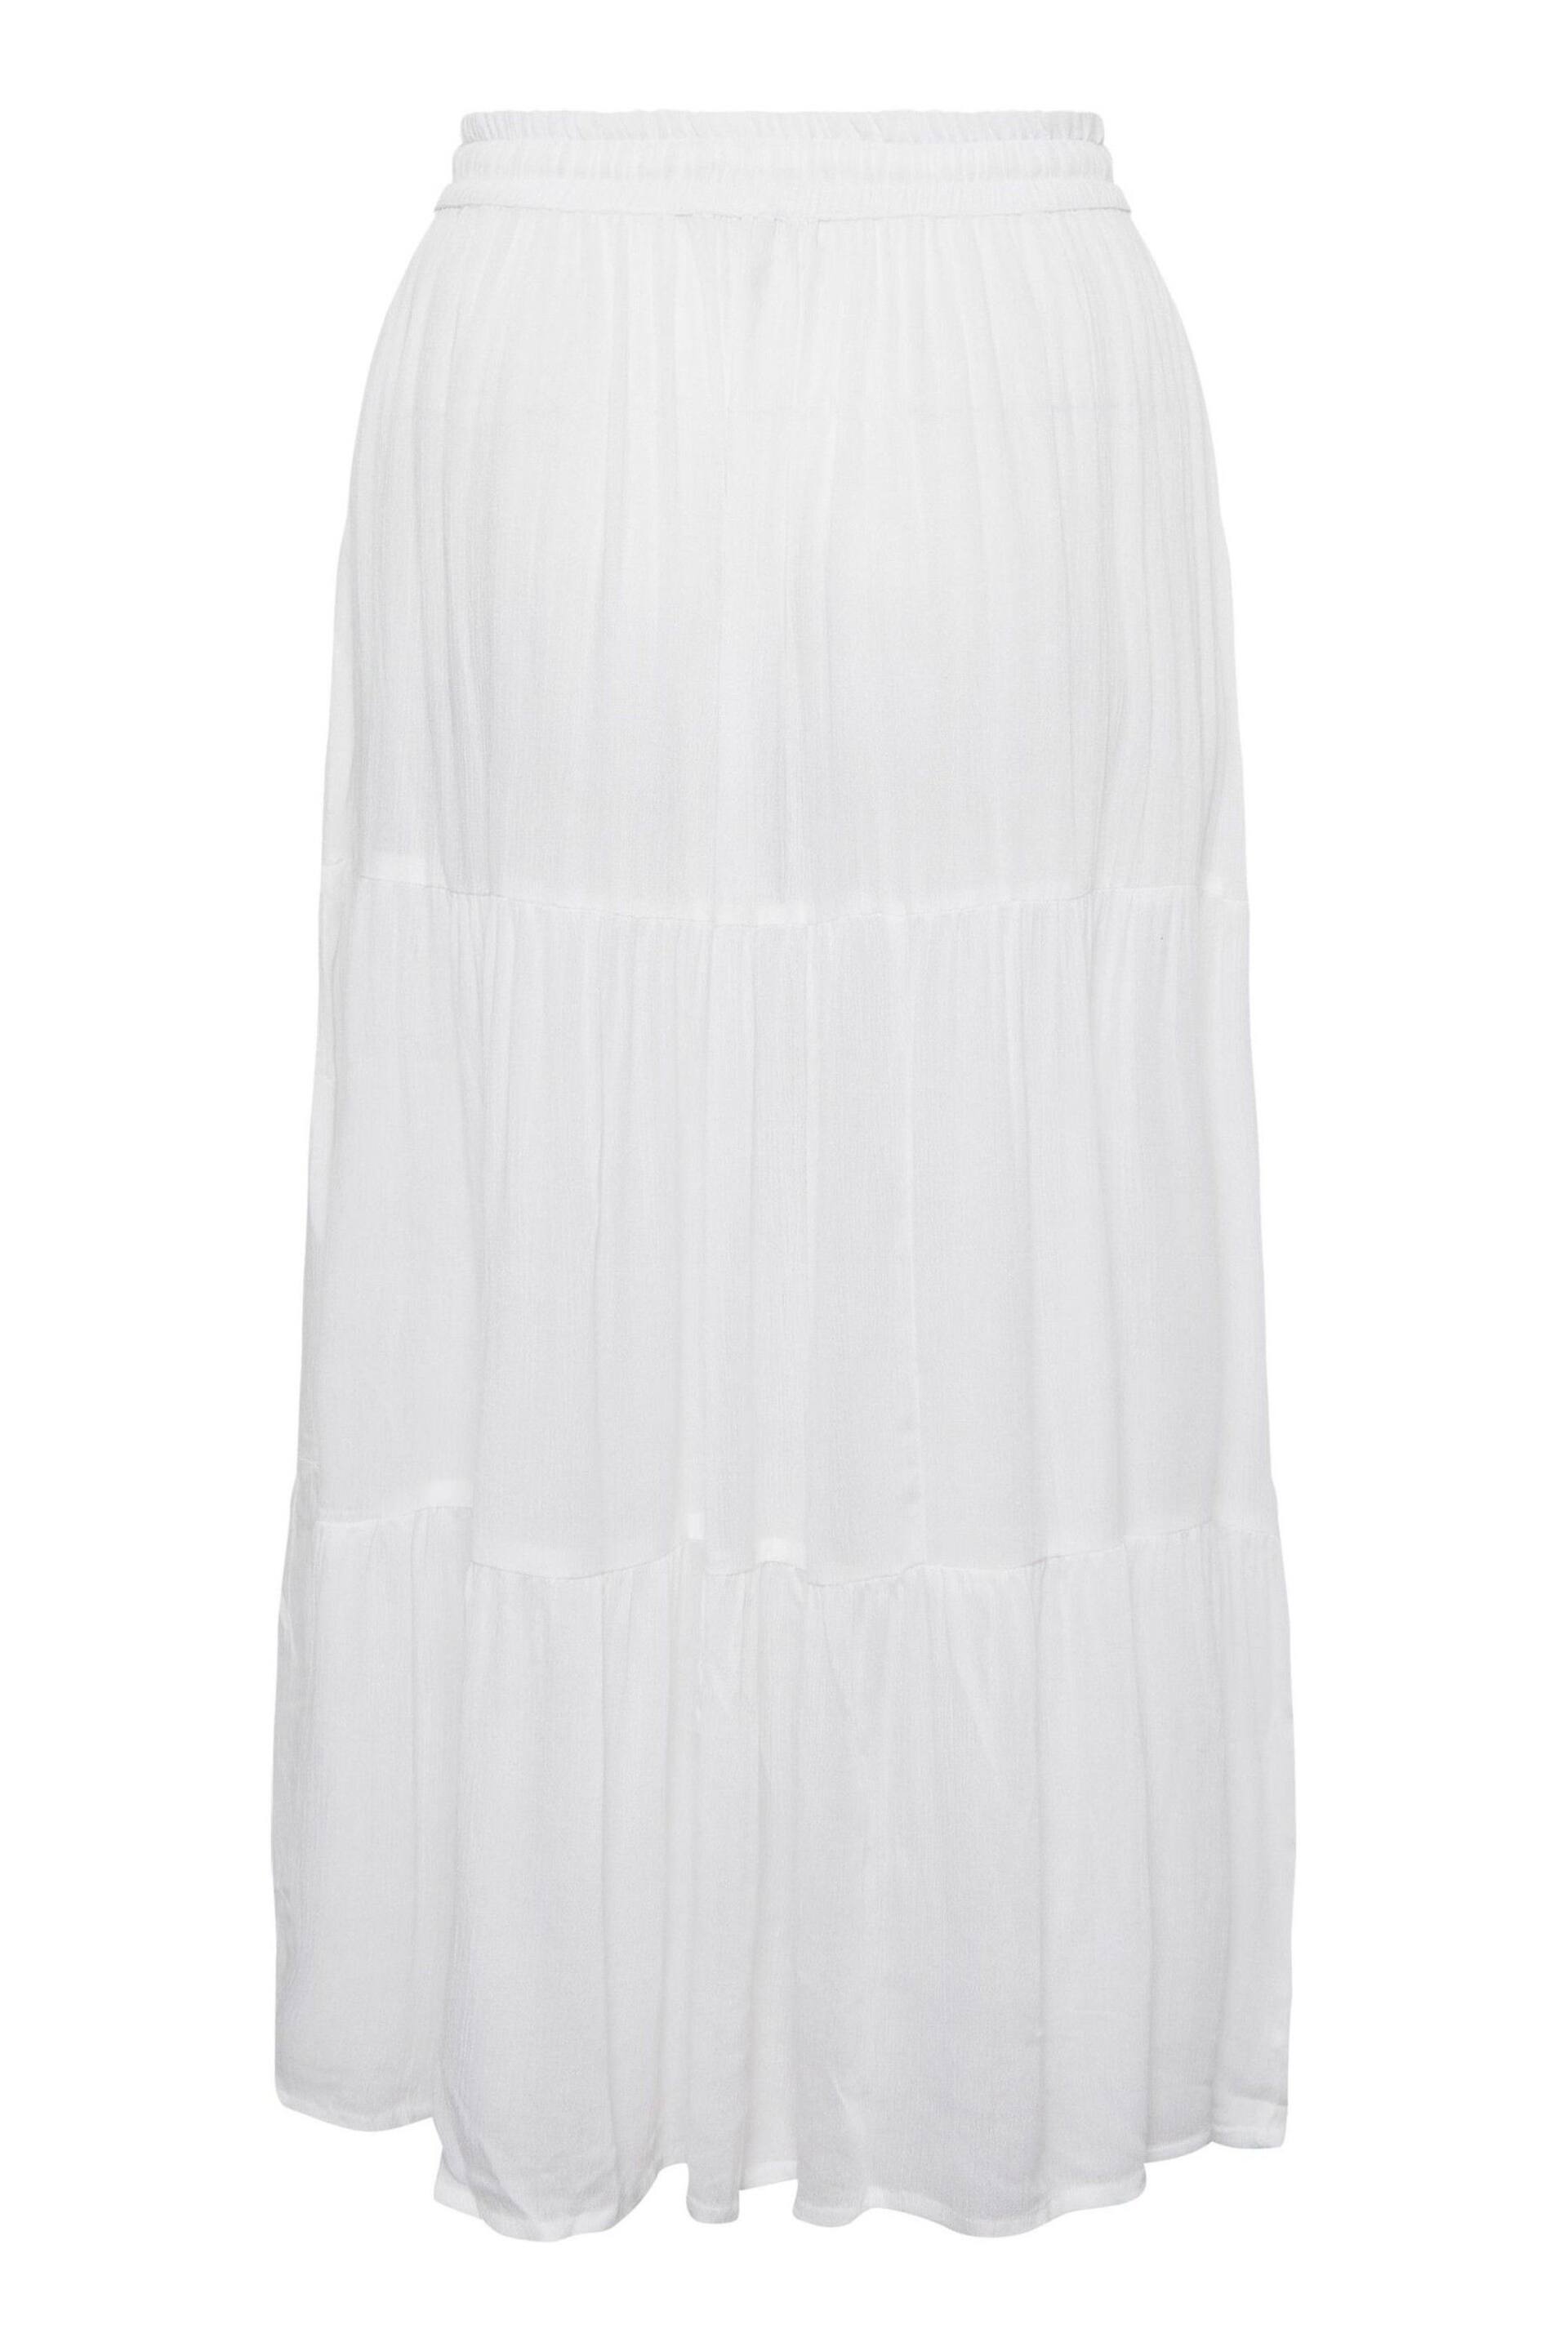 Yours Curve White Beach Skirt - Image 4 of 4